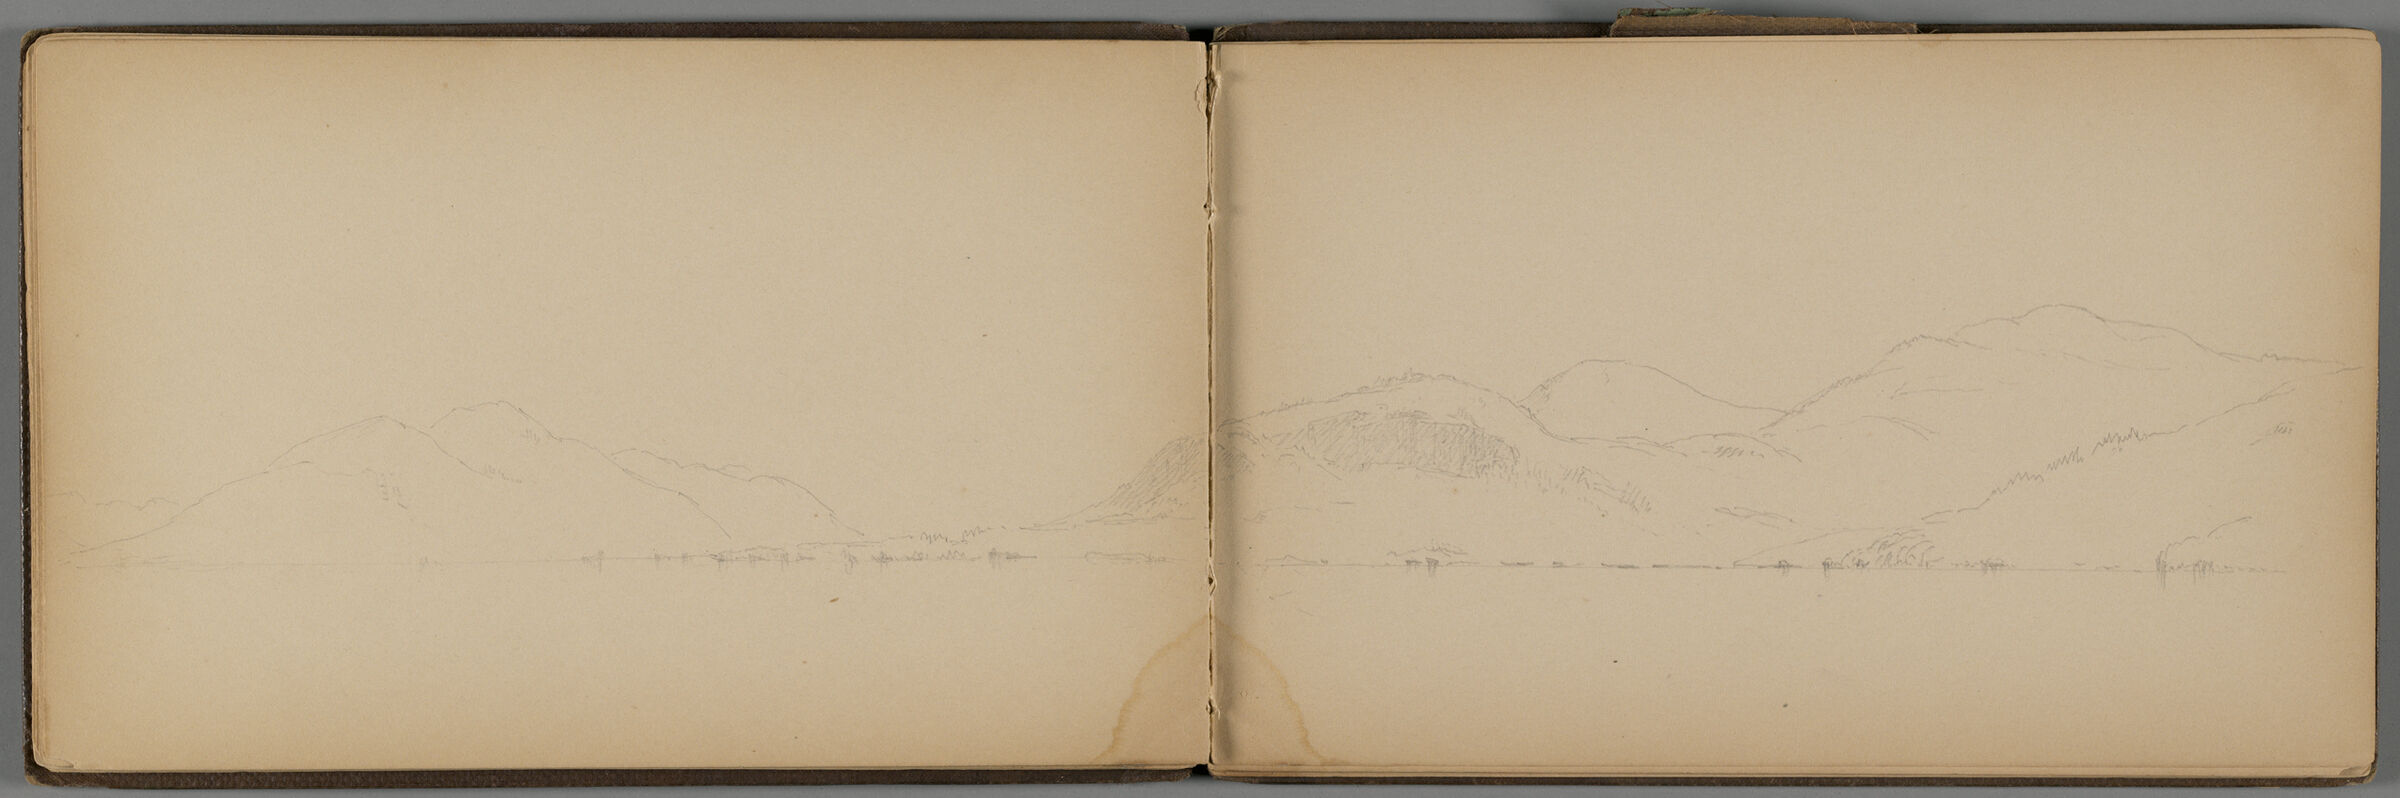 Landscape With Lake; Verso: Partial Landscape With Lake